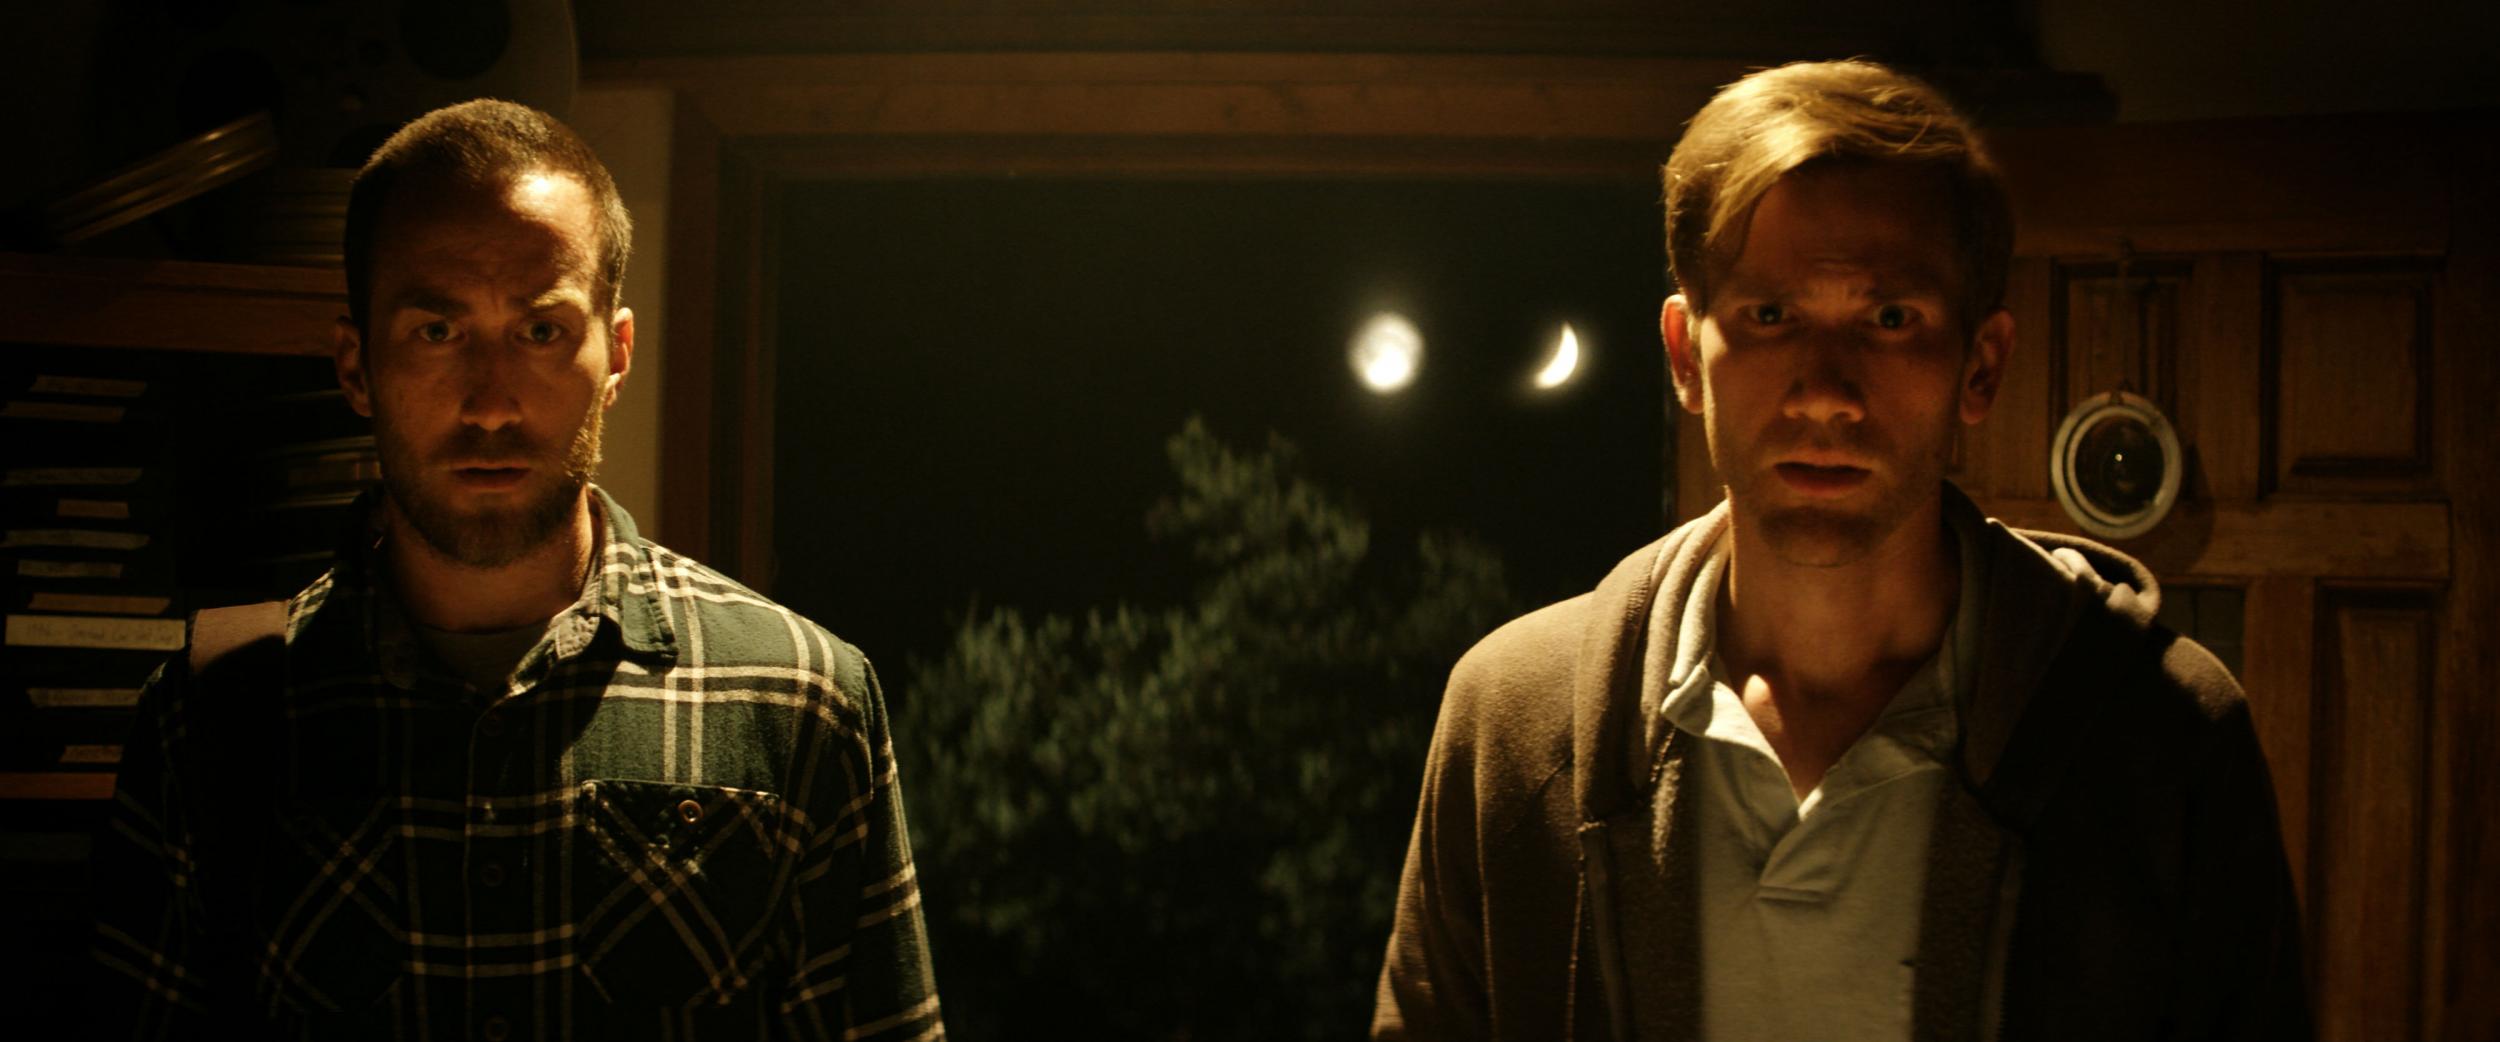 Justin Benson and Aaron Moorhead hope to emulate the Coen brothers’ success